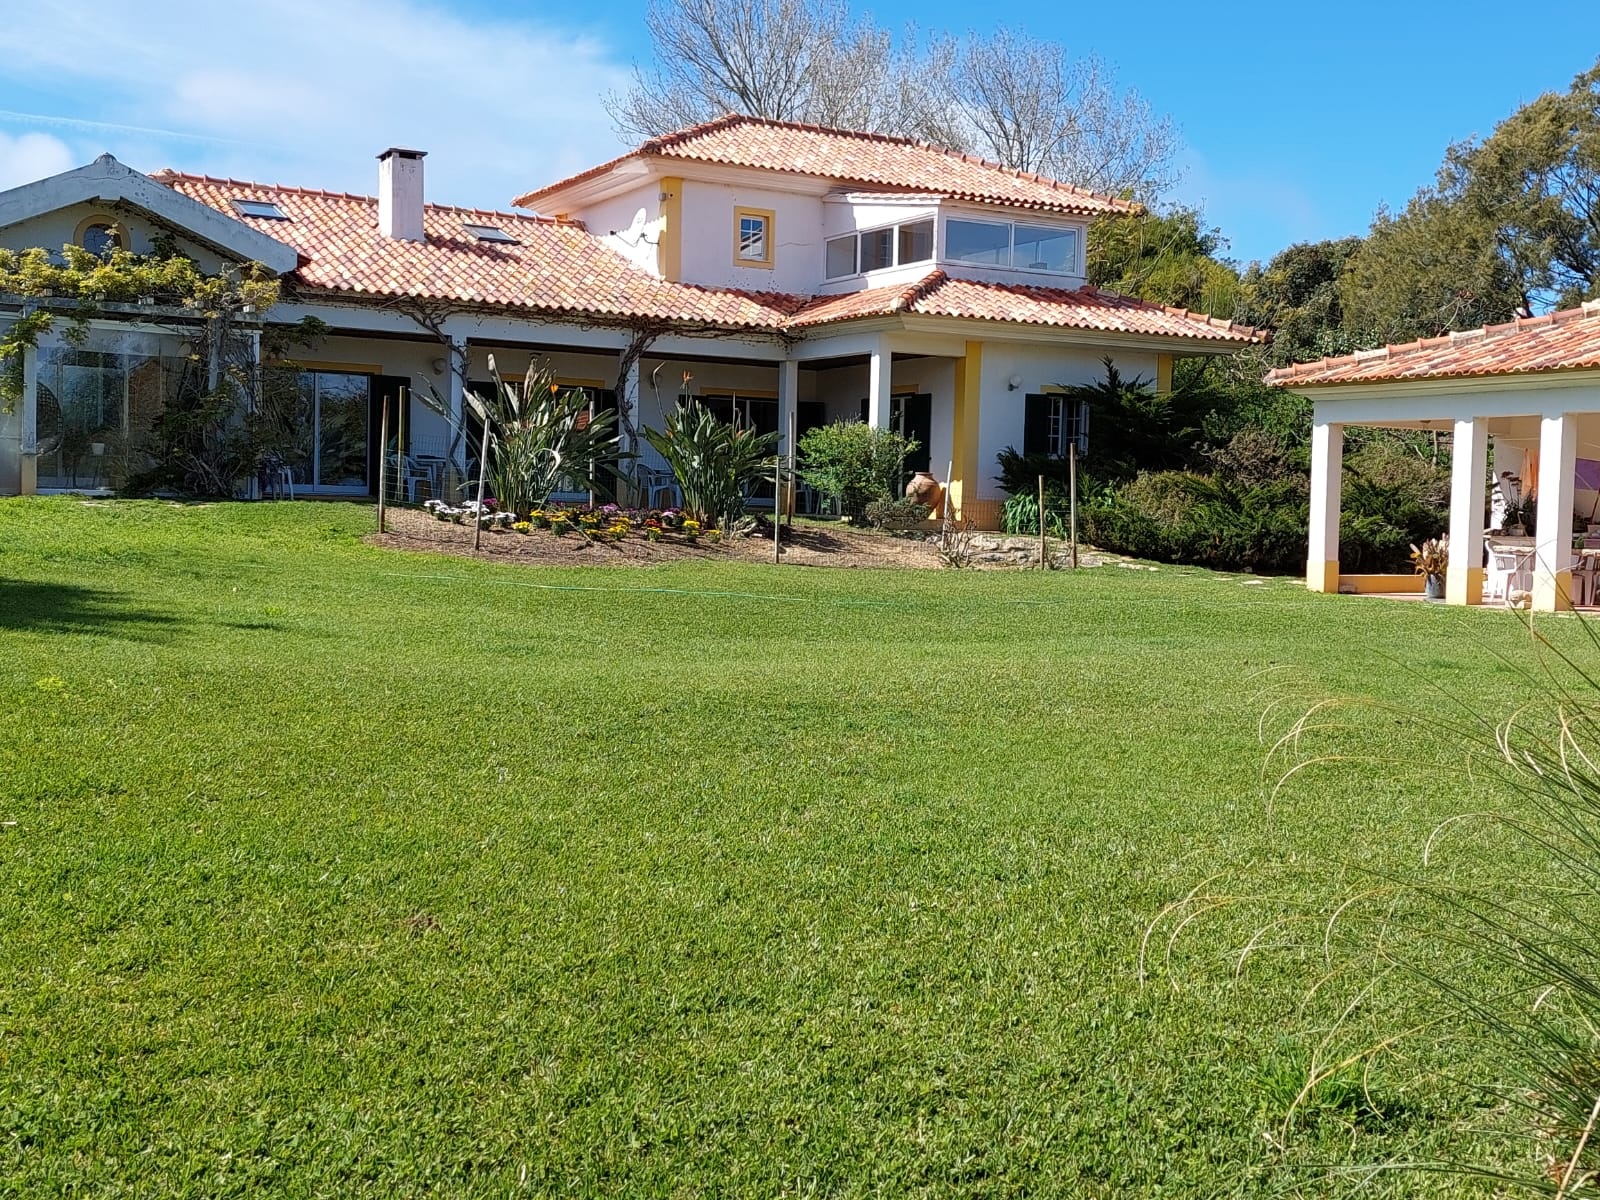 For Sale Detached Villa Sintra Portugal Mor4484fgwhatsapp Image 2023 04 19 At 21.20.18 (3)